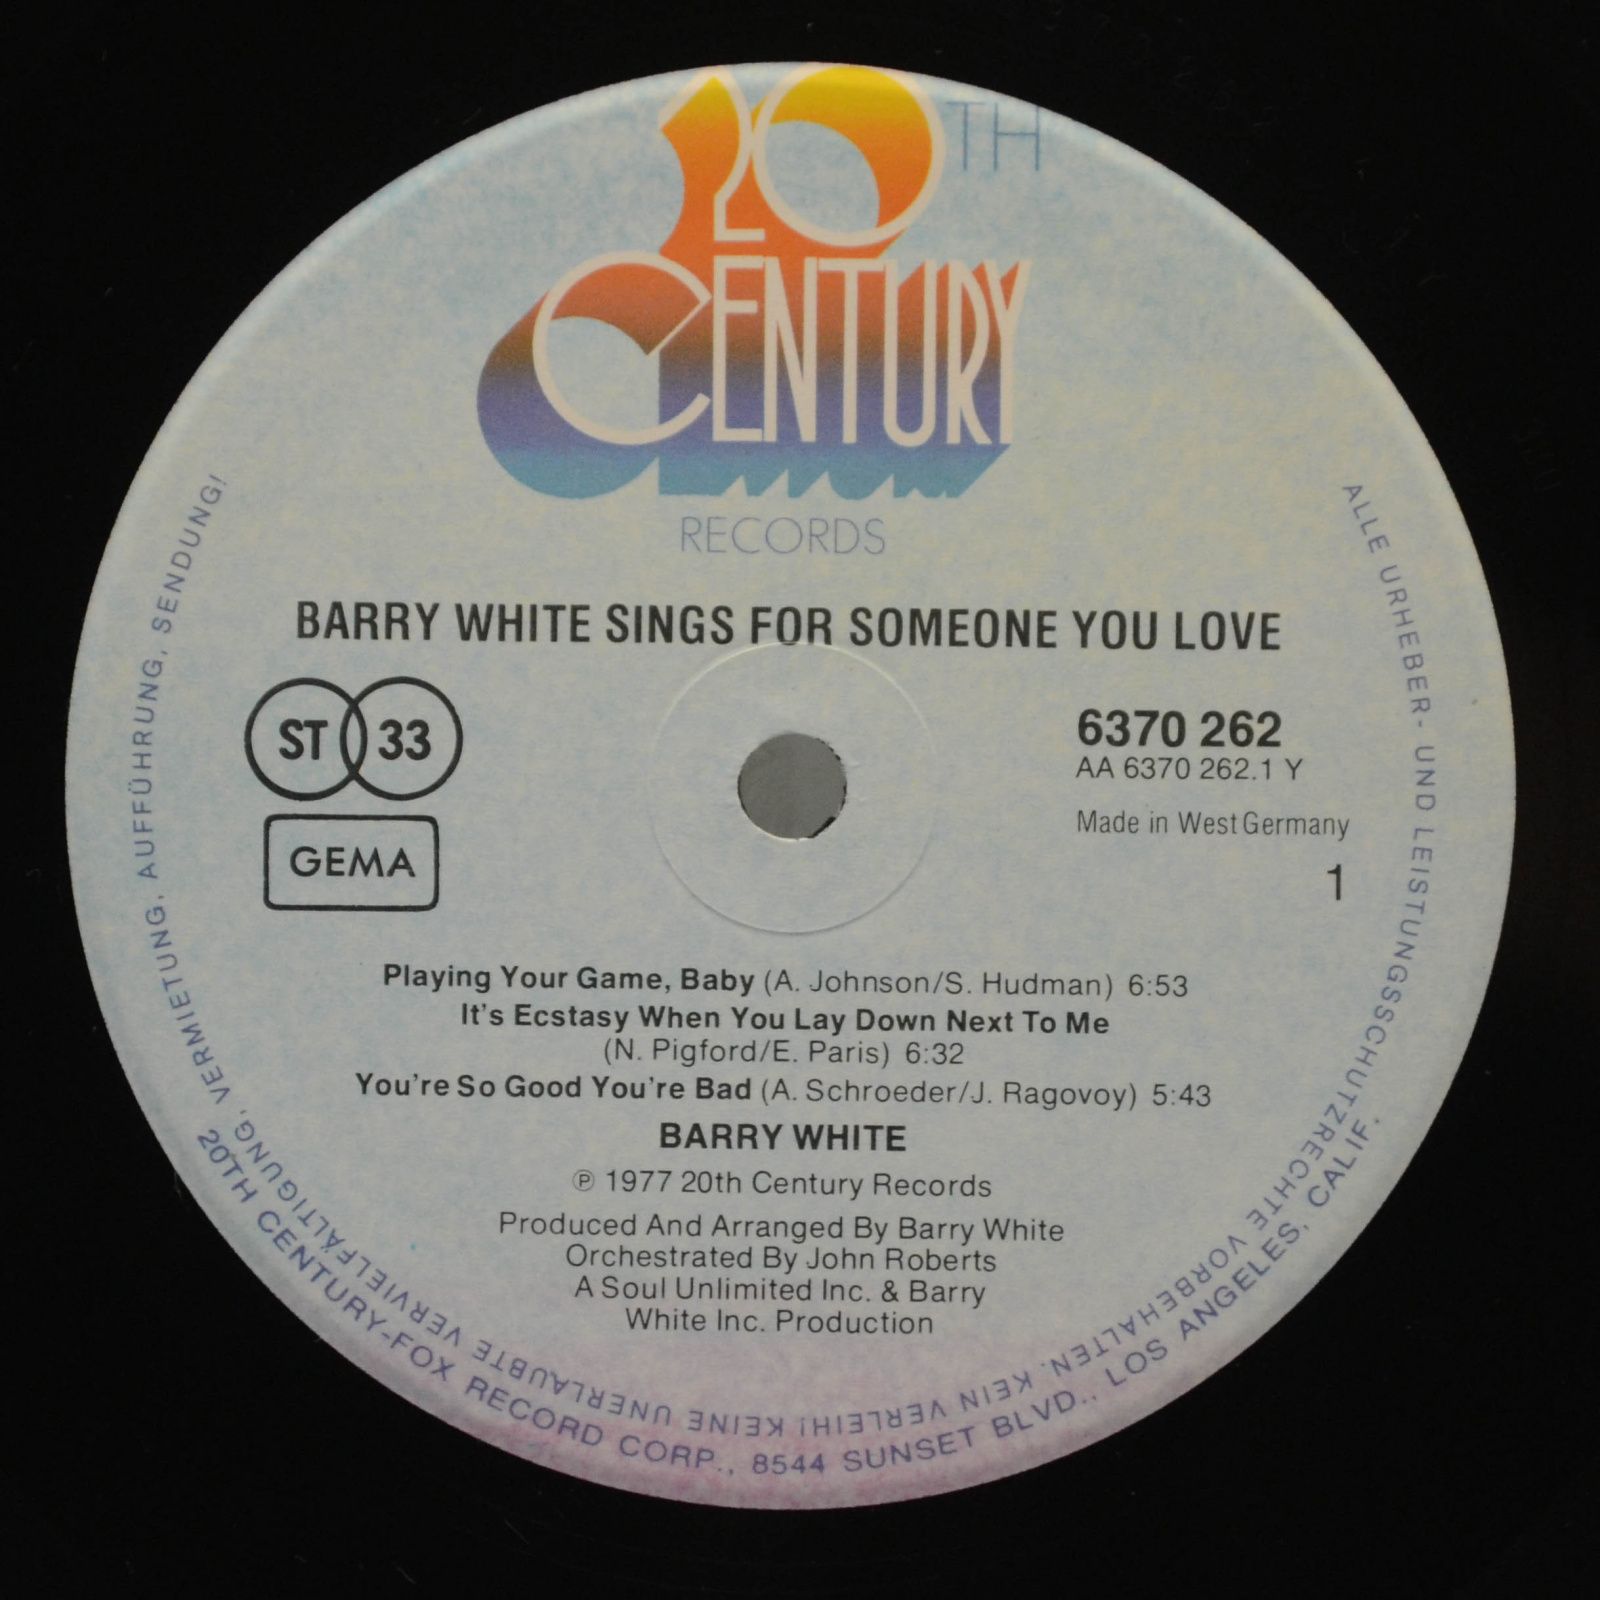 Barry White — Barry White Sings For Someone You Love, 1977